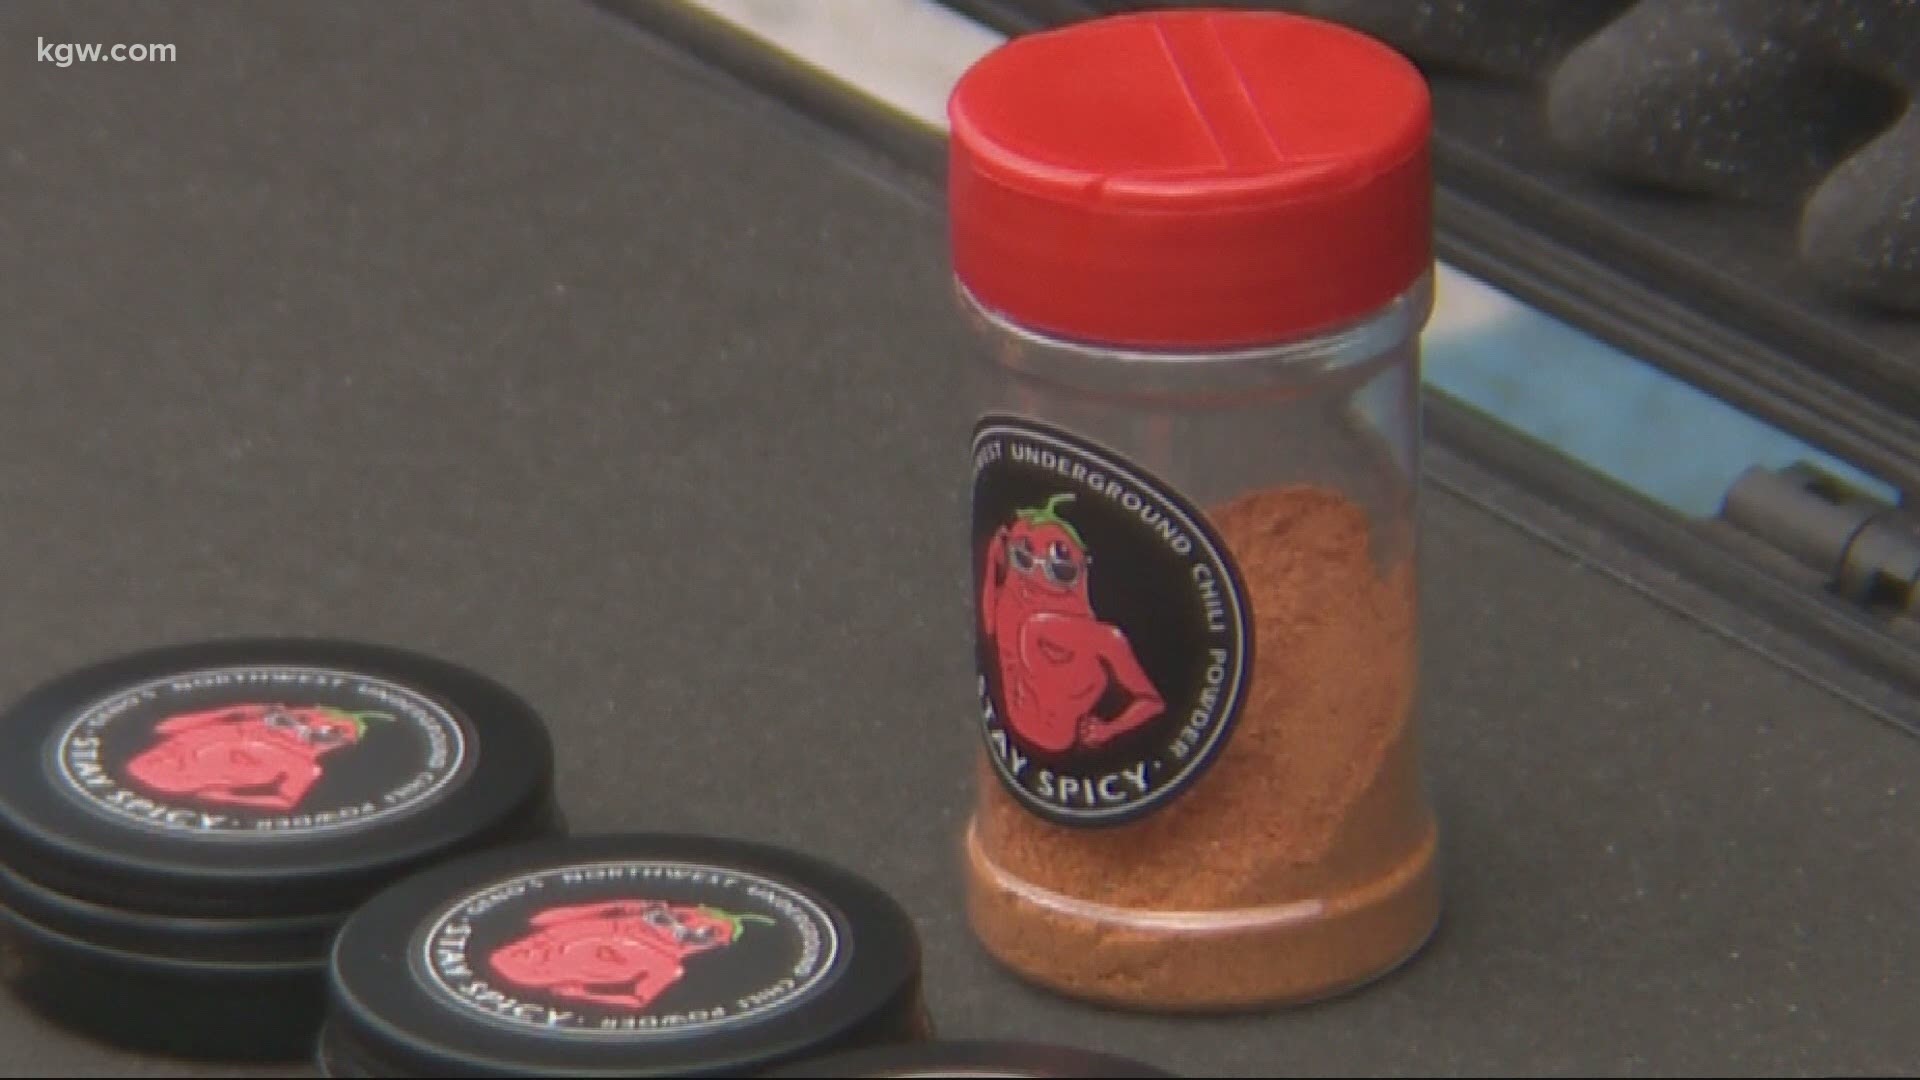 While coronavirus is forcing businesses to pivot, one Portland entrepreneur is thriving. Meet the creator of Geno's Northwest Underground Chili Powder.